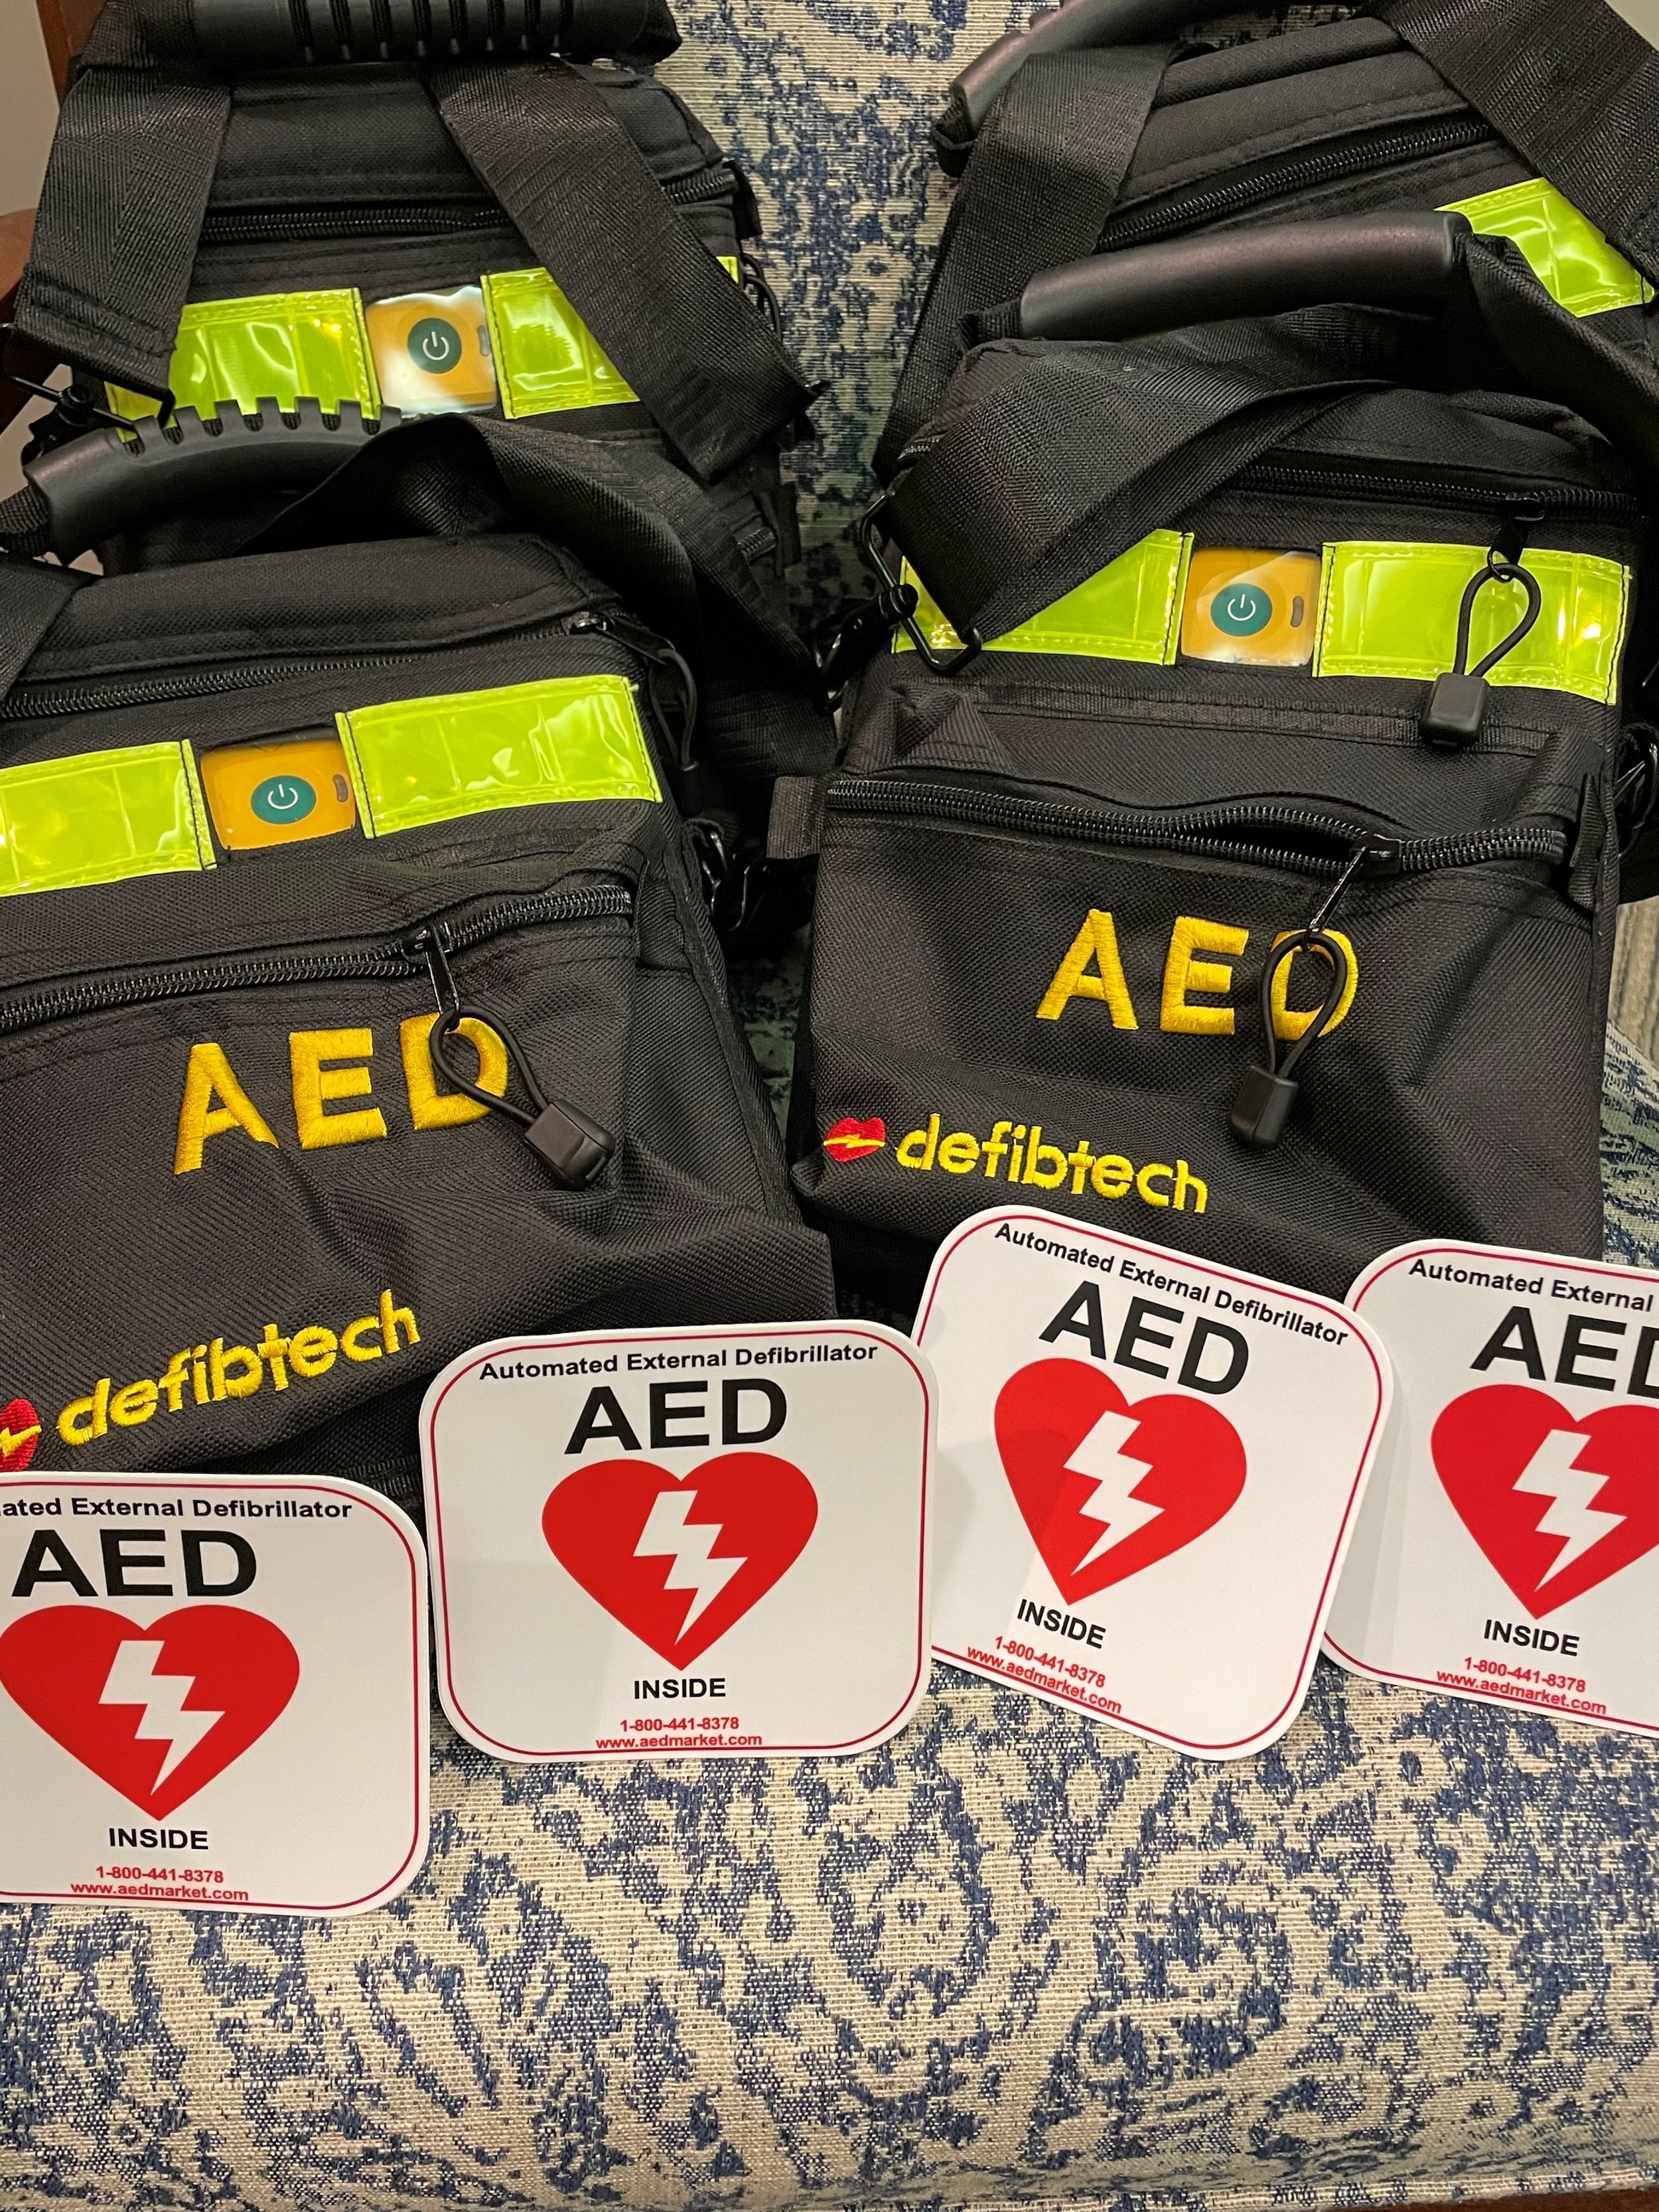 Purchased AEDs for Ferries